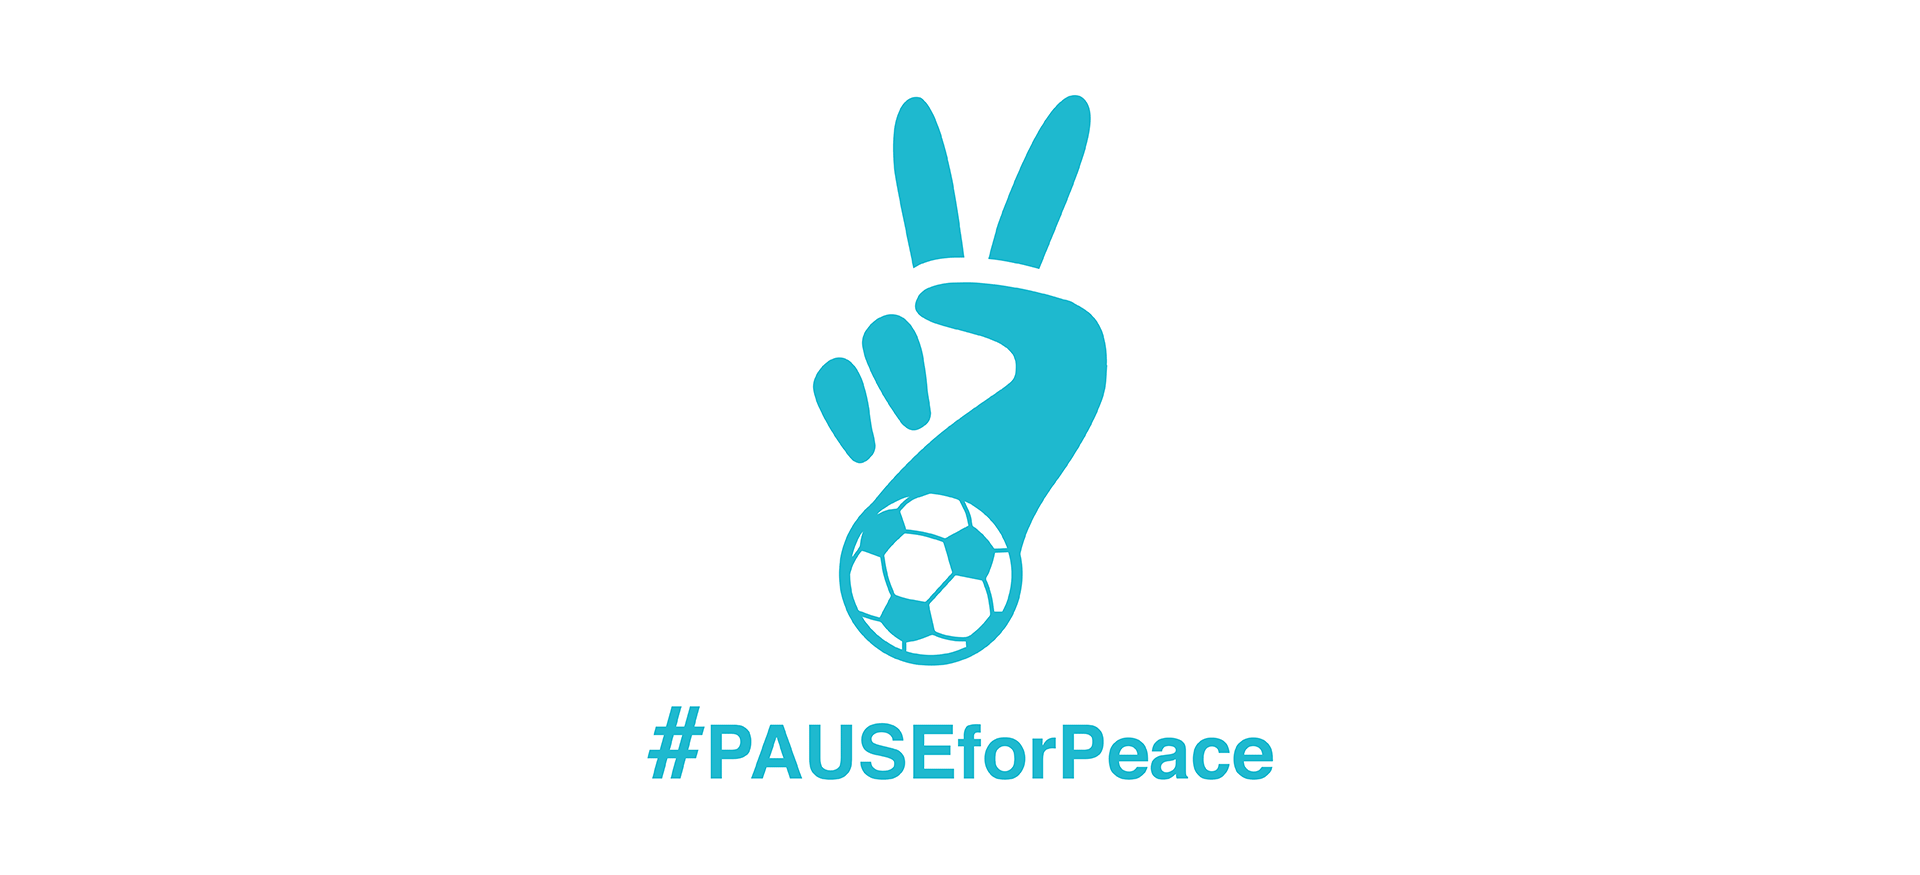 logo_pauseforpace